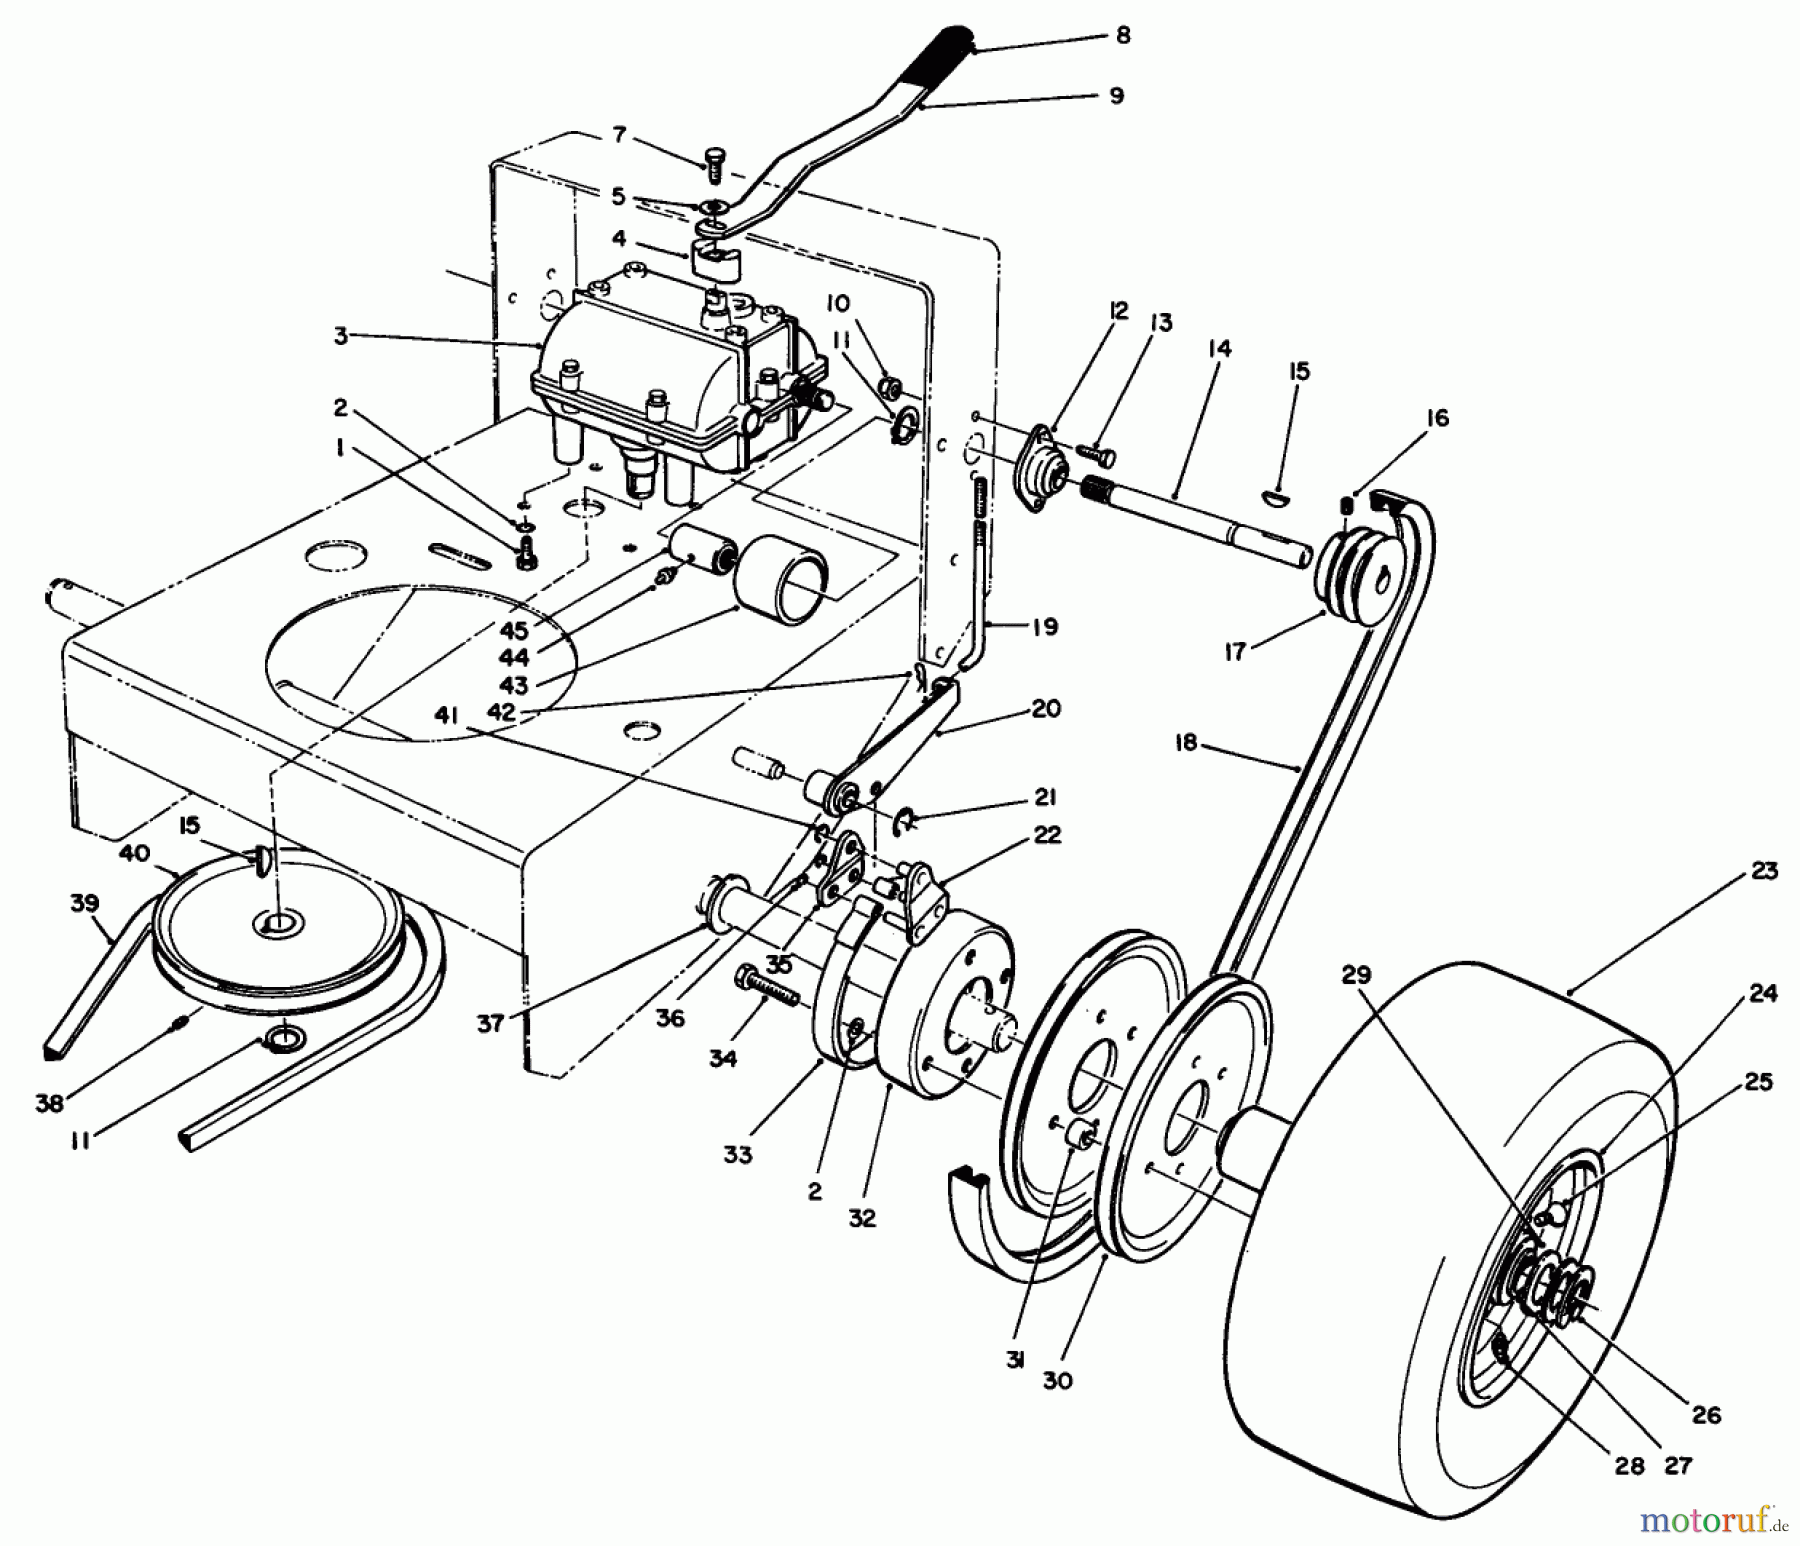  Toro Neu Mowers, Drive Unit Only 30106 - Toro Mid-Size Proline Gear Traction Unit, 12.5 hp, 1991 (1000001-1999999) AXLE ASSEMBLY